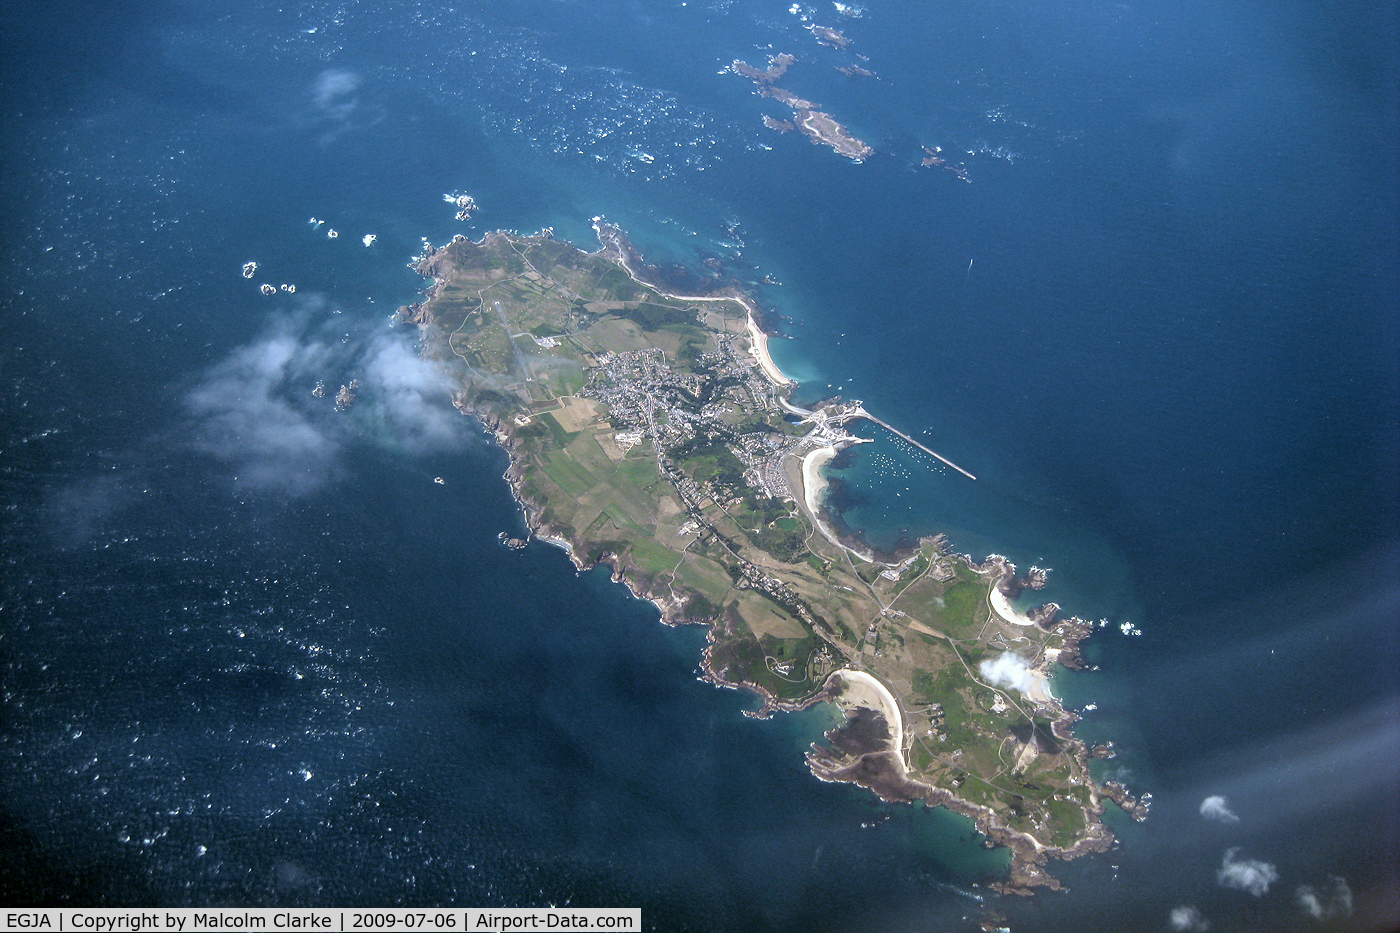 Alderney Airport, Alderney, Channel Islands United Kingdom (EGJA) - Alderney, Channel Islands with the airport seen at the northern end of the island. Taken during a flight from Jersey to Newcastle in 2009.